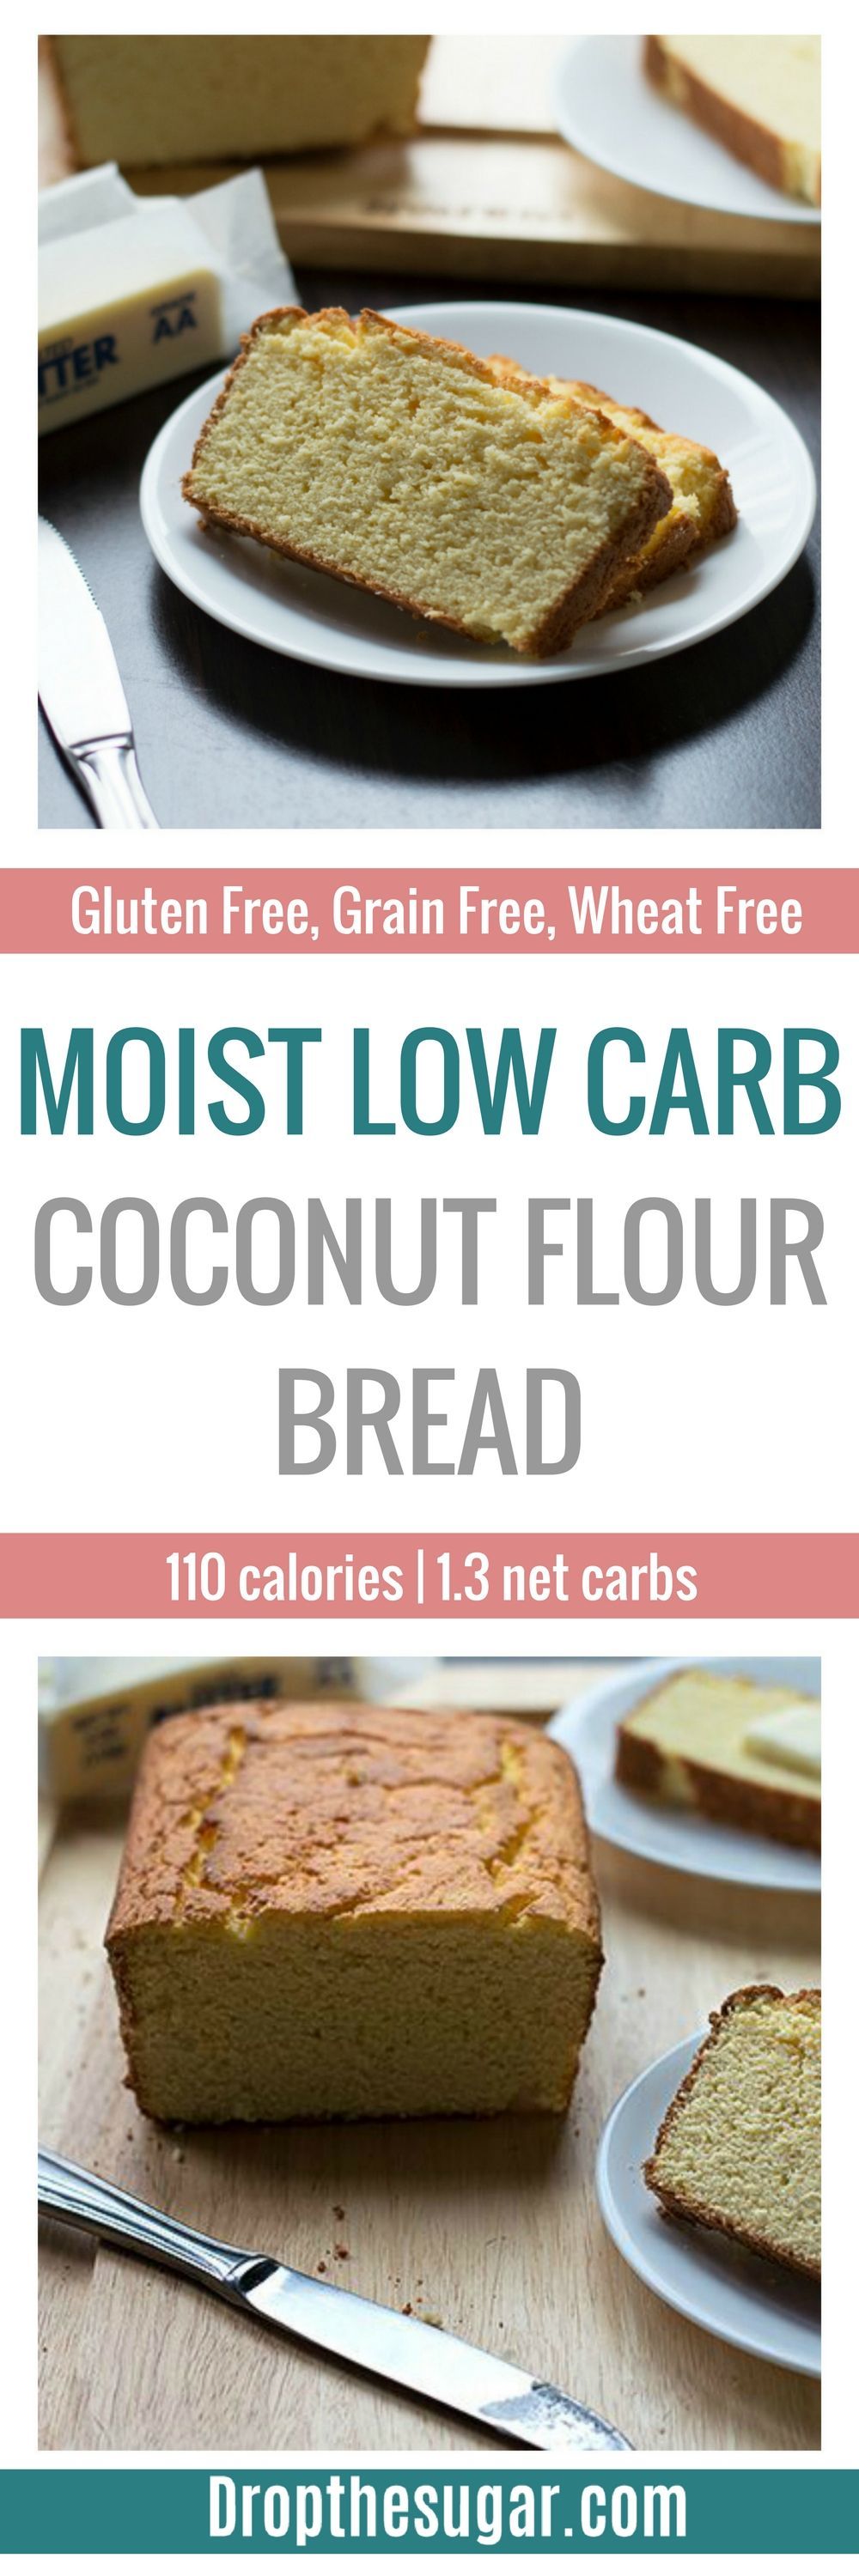 Moist Low Carb Coconut Flour Bread | an easy to make low carb bread using coconut flour as the base. Whats great is this is also a